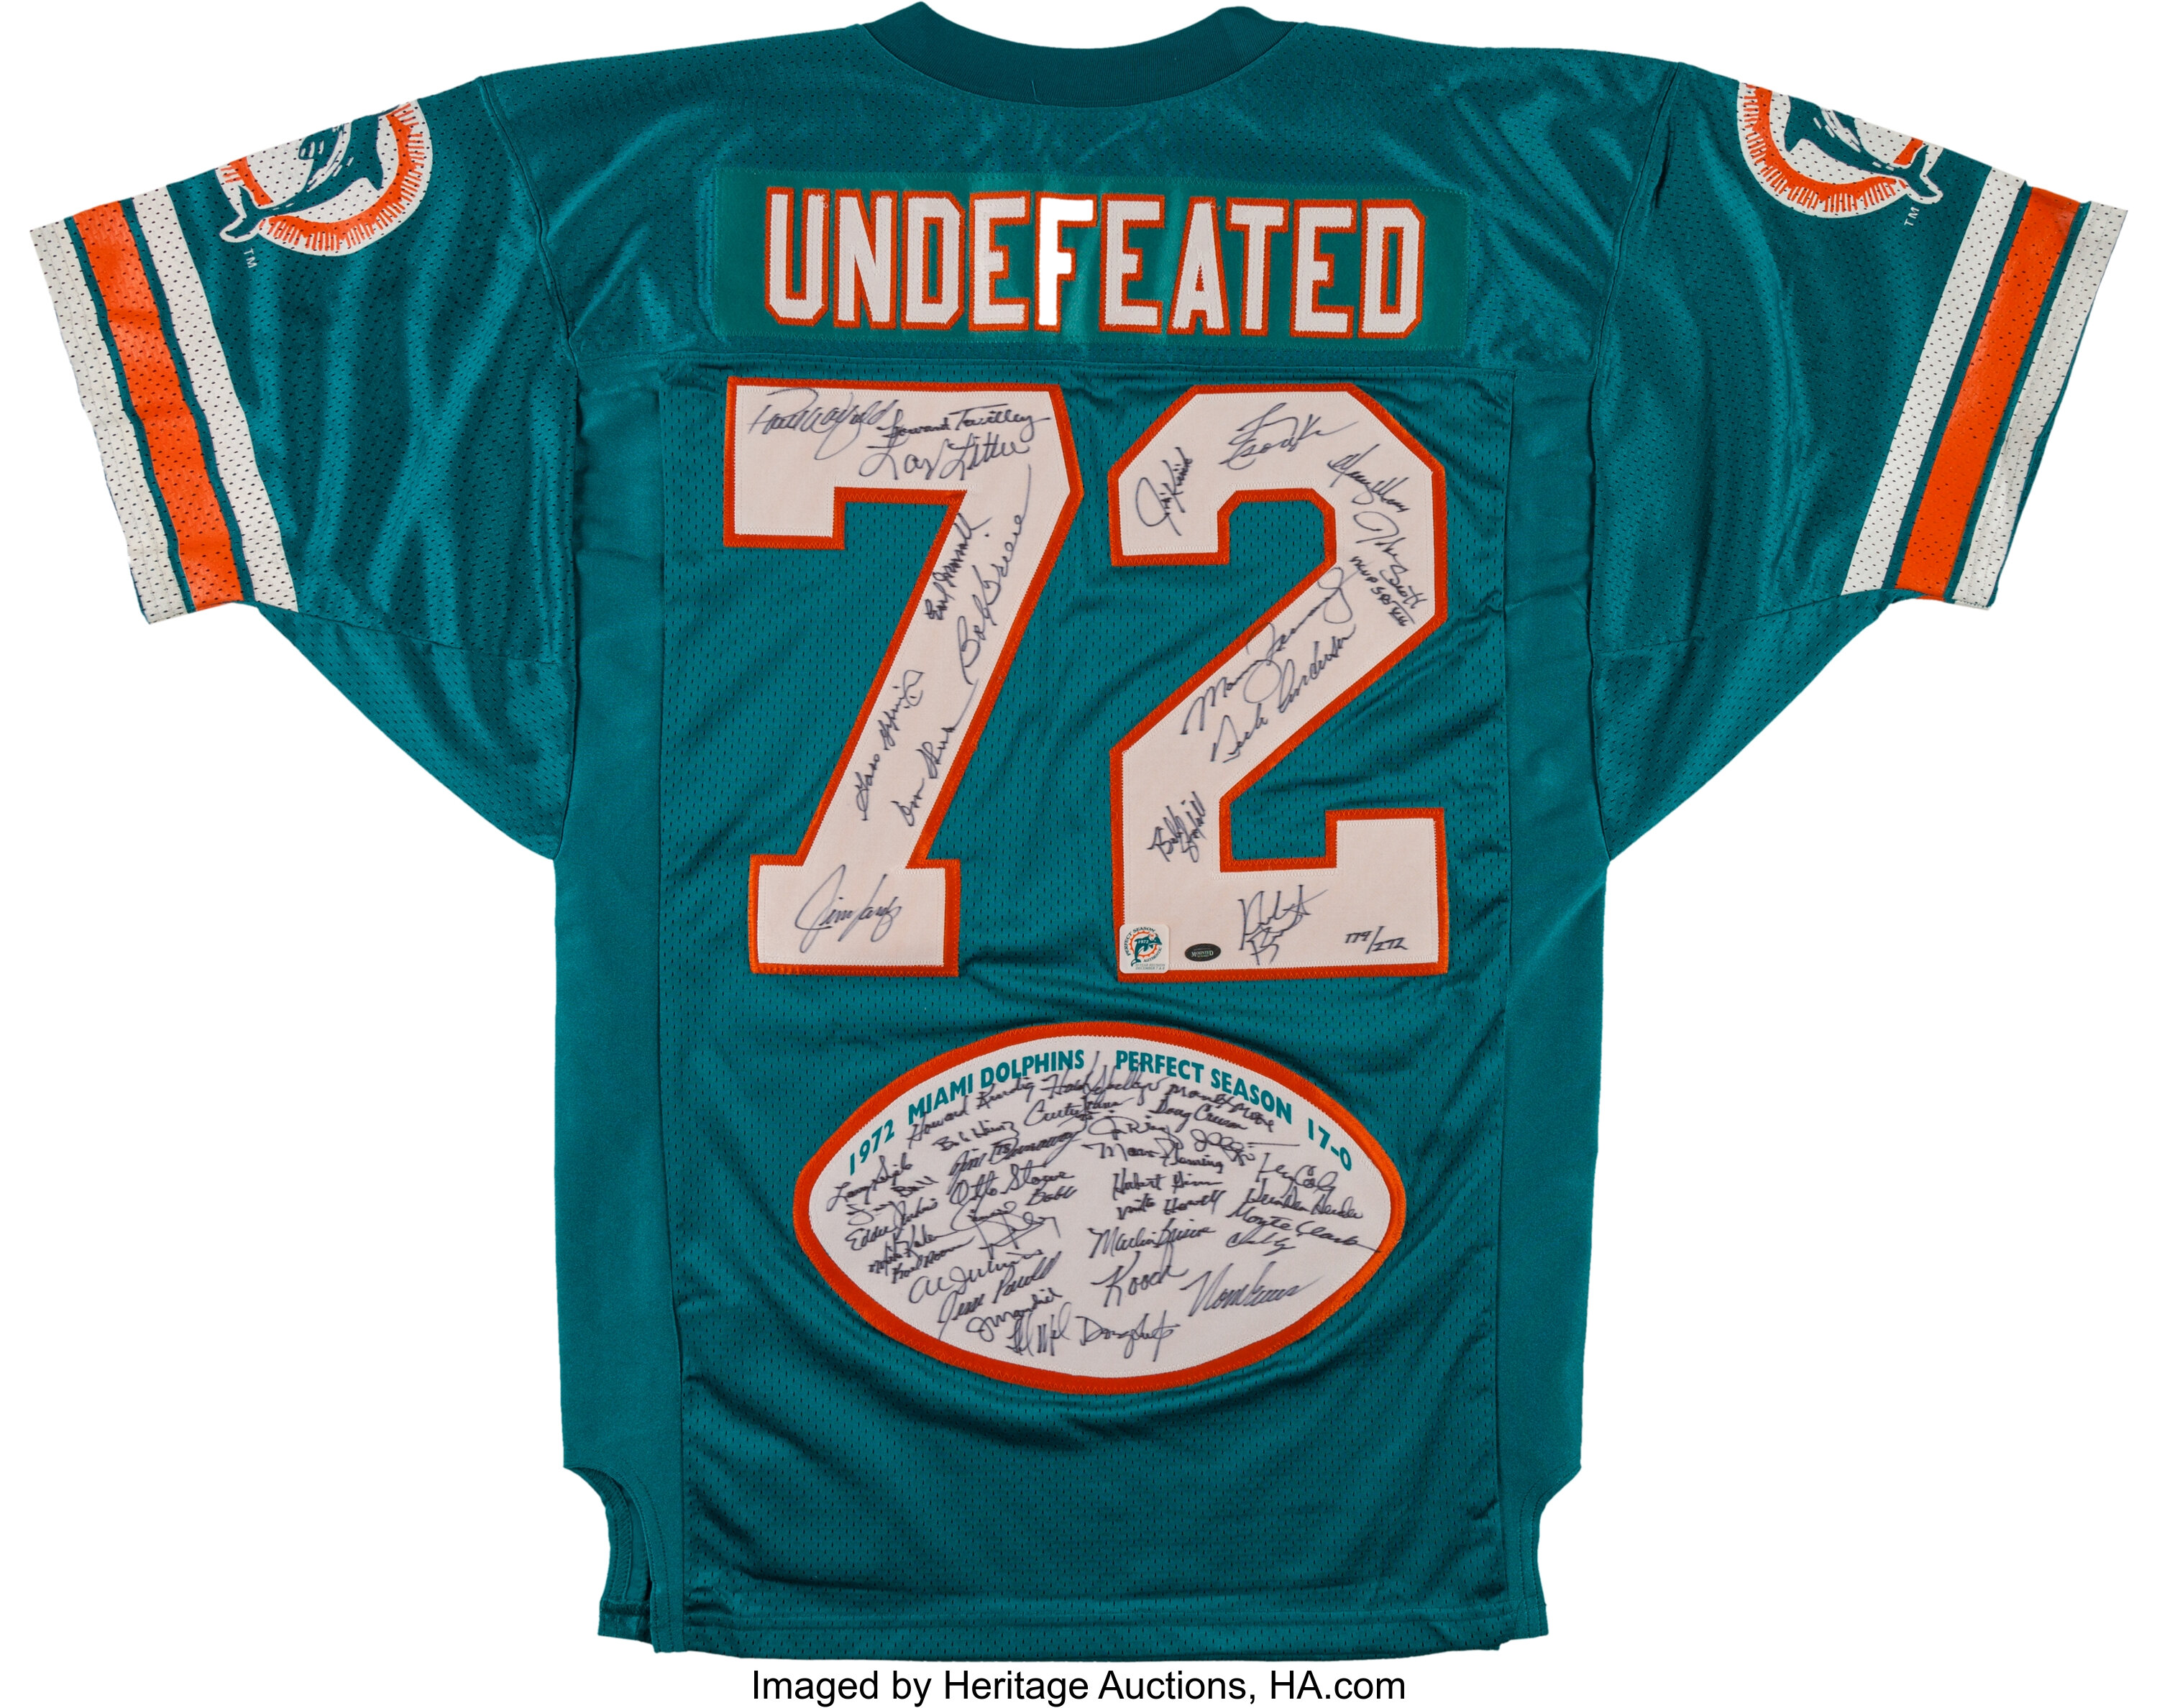 1972 Miami Dolphins Team Signed Undefeated Season Reunion